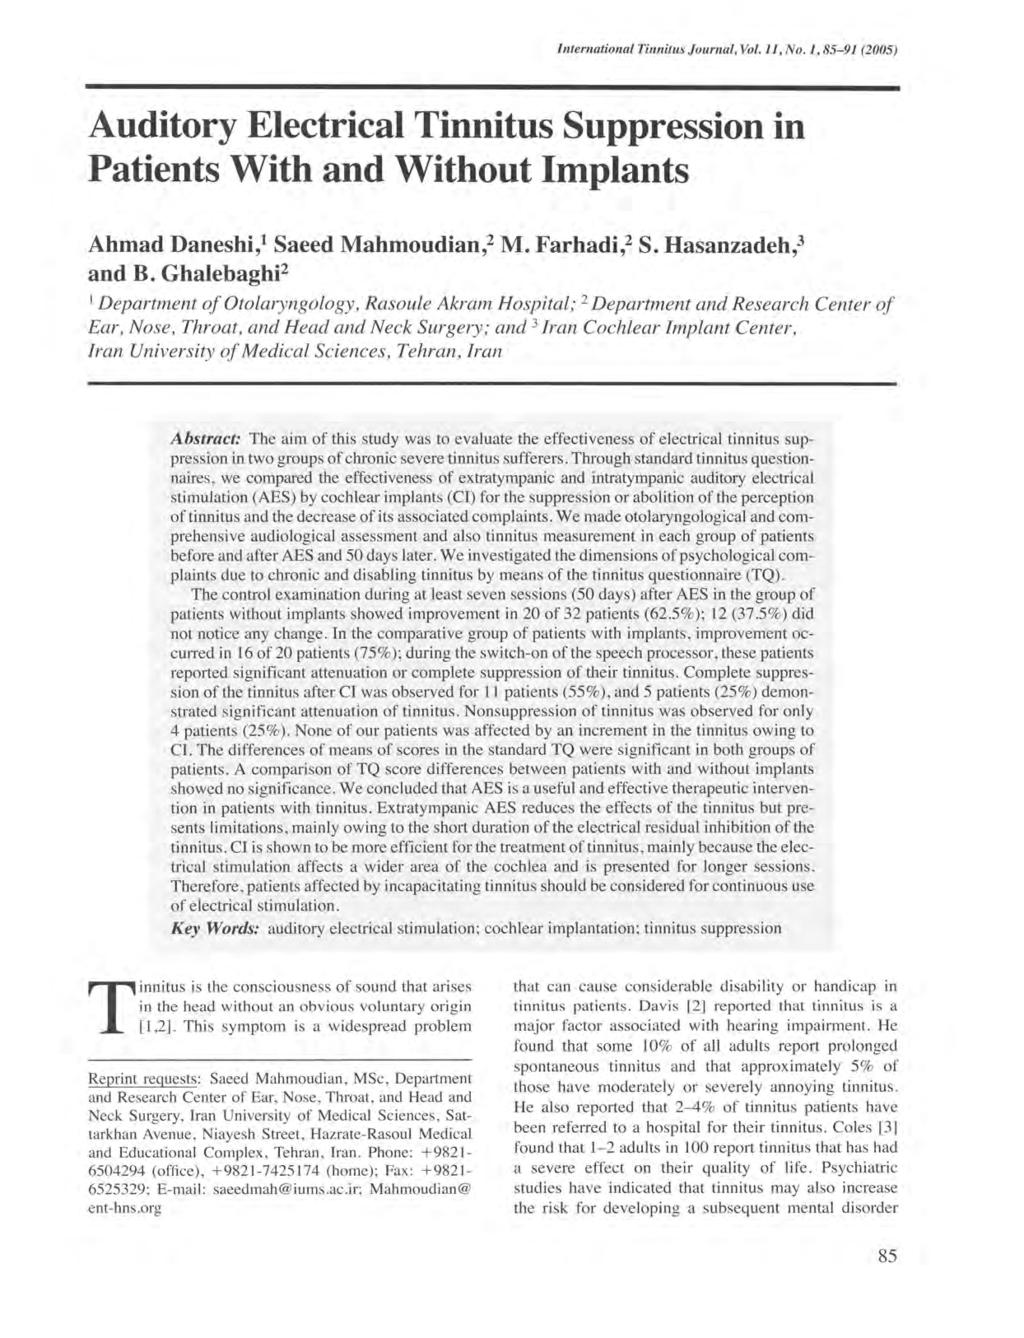 International Tinnitus Journal, Vol. 11, No.1, 85-91 (2005) Auditory Electrical Tinnitus Suppression in Patients With and Without Implants Ahmad Daneshi,1 Saeed Mahmoudian,2 M. Farhadi,2 S.